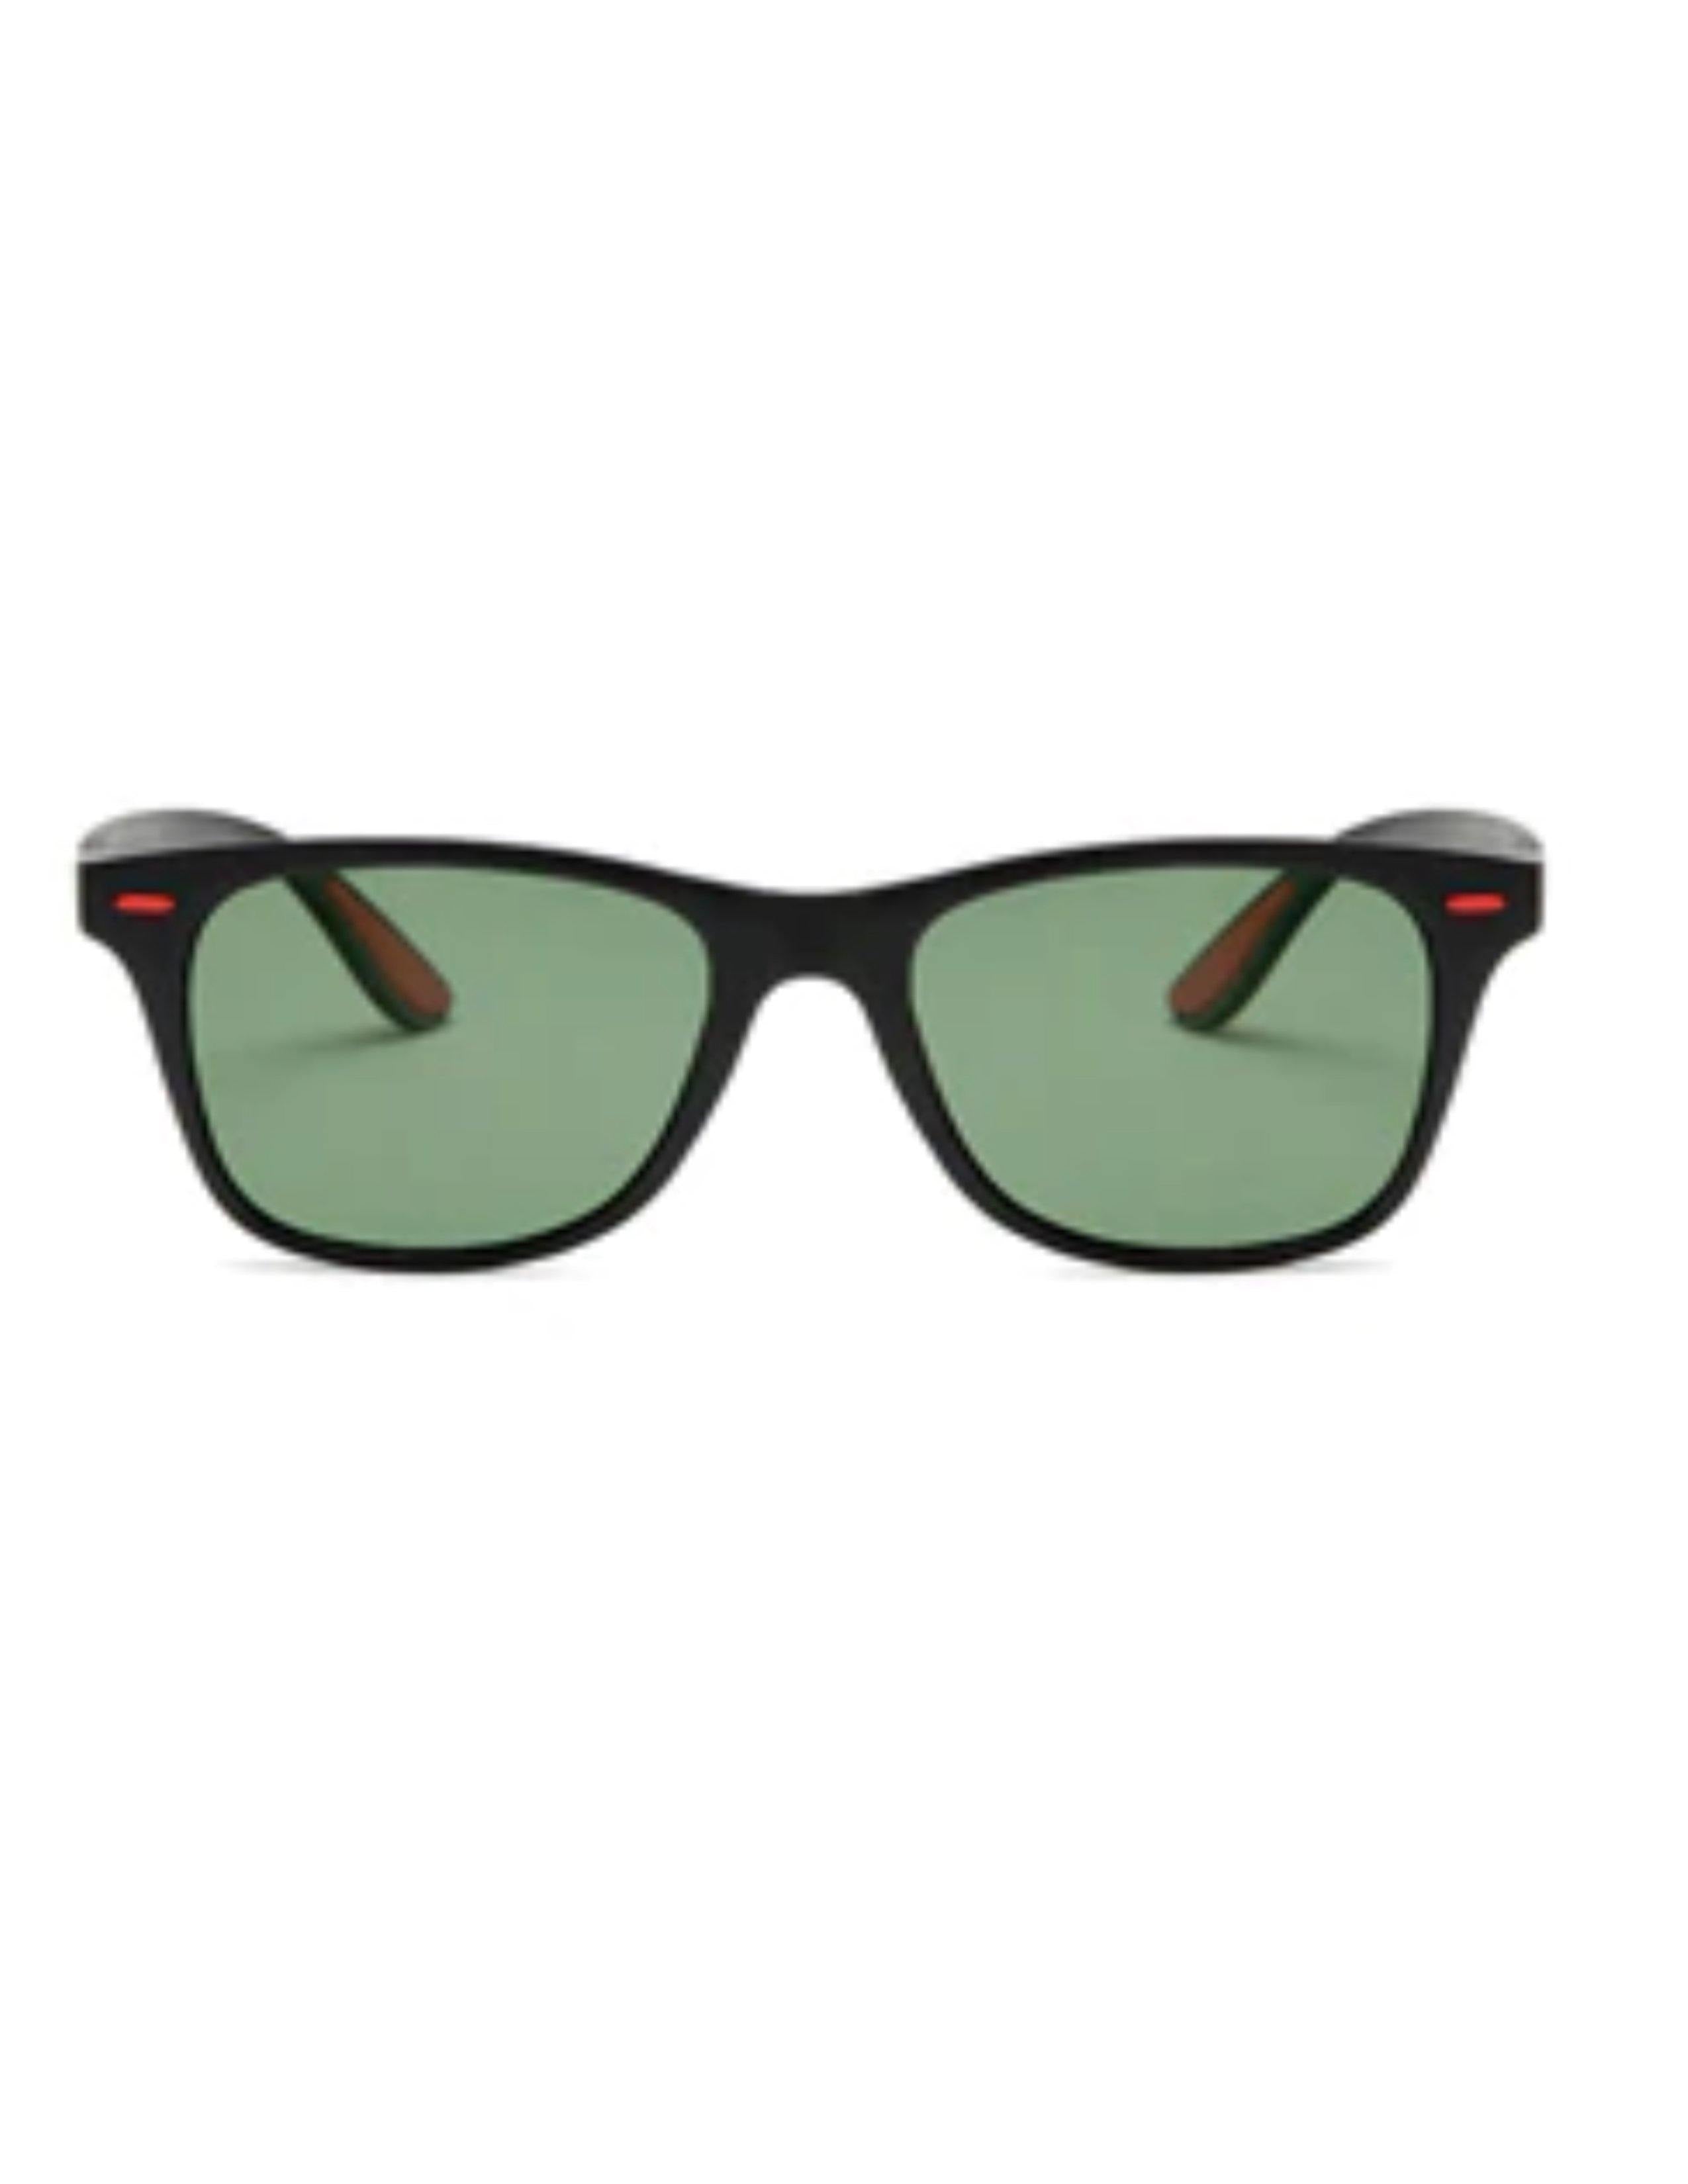 Leapfrog Classic Polarized Sunglasses - Leapfrog Outdoor Sports and Apparel